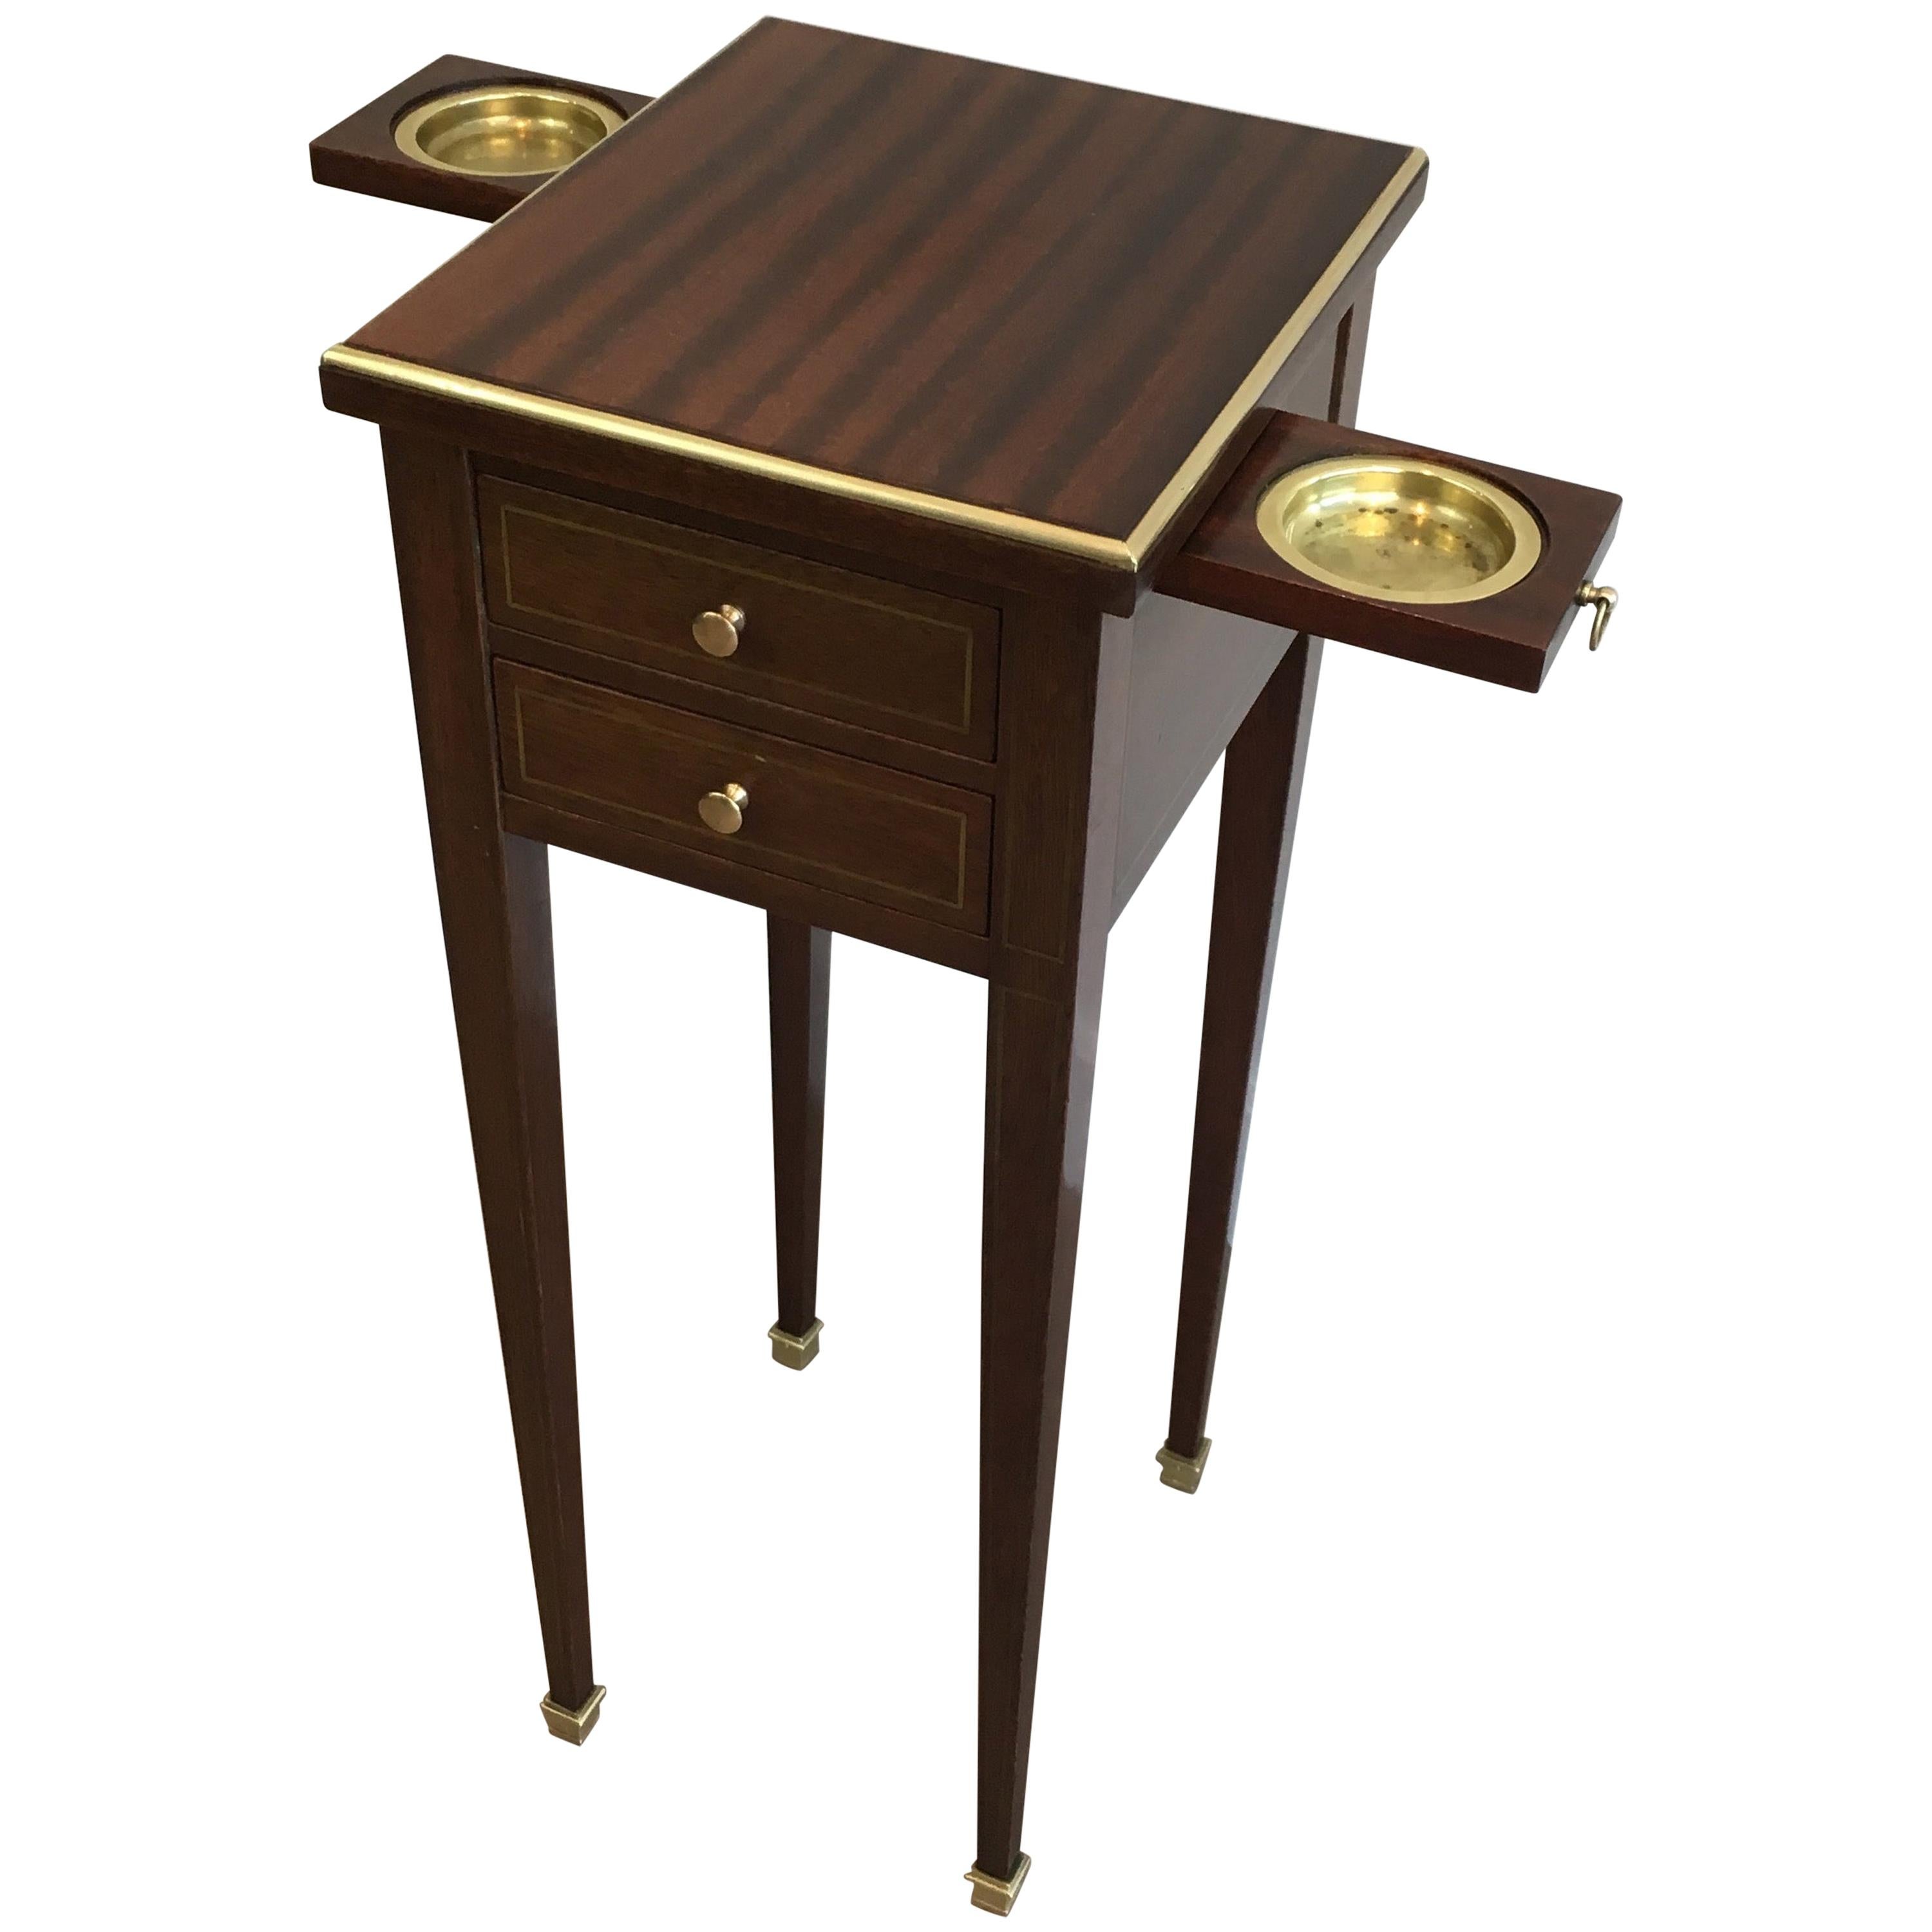 Unusual Neoclassical Small Drawers Table with Sliding Ashtrays